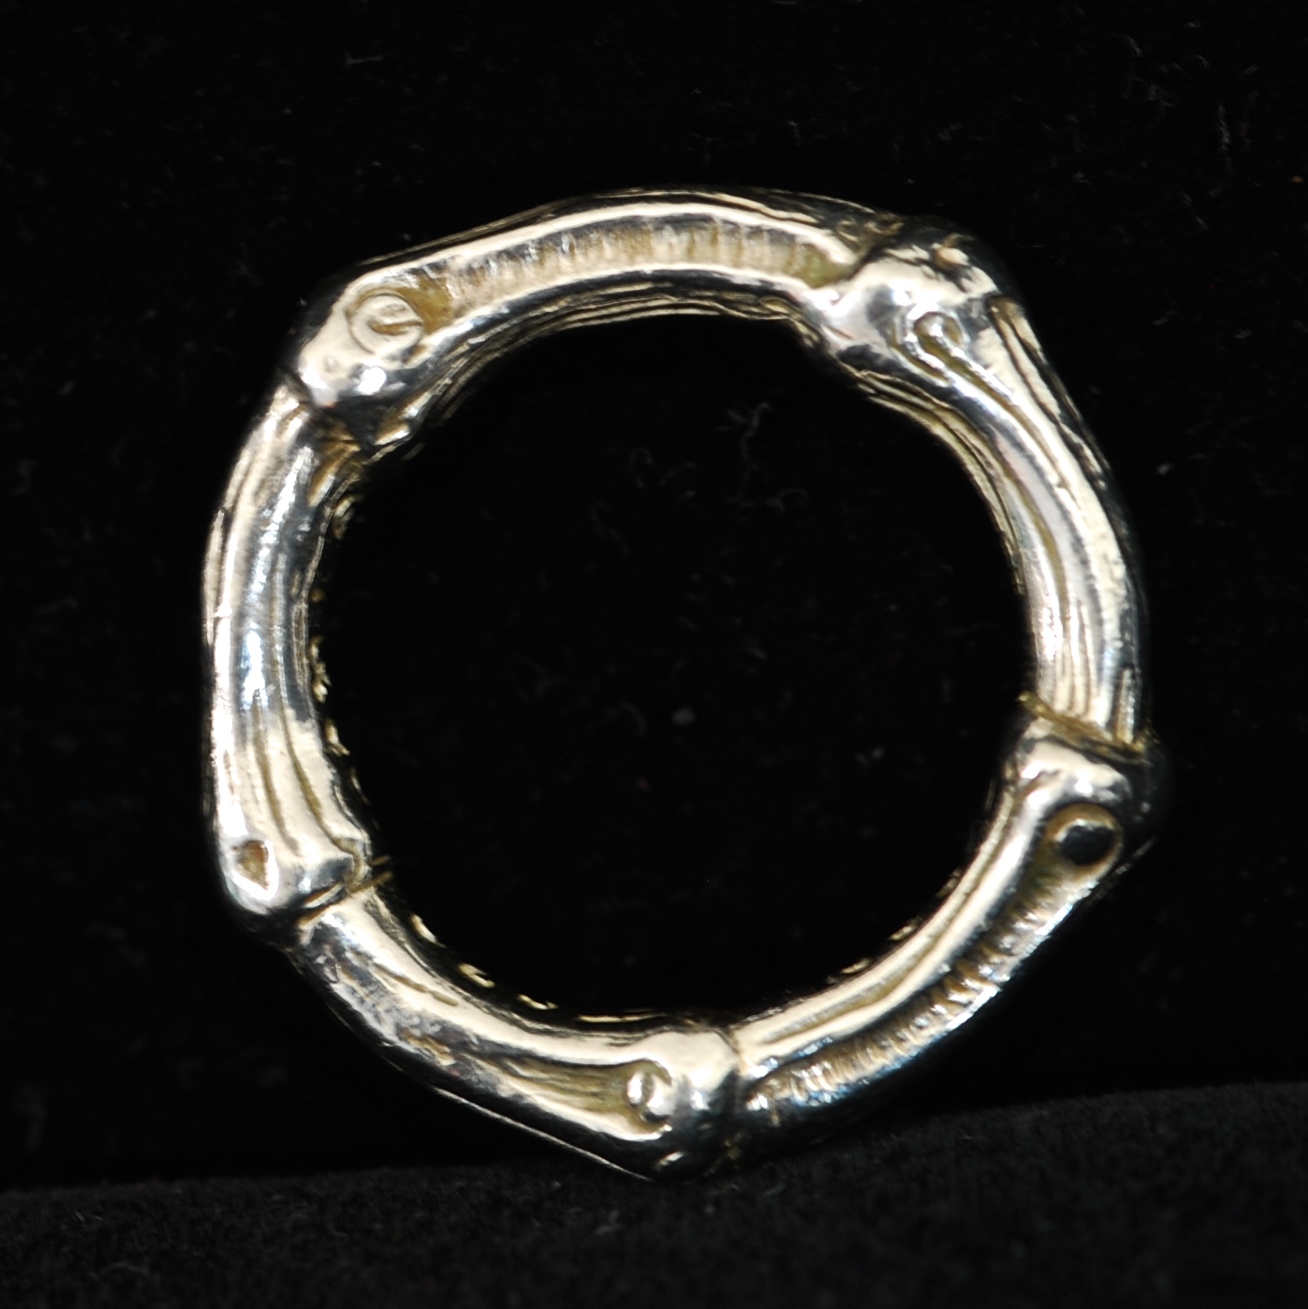 SCARF WITH A SILVER RING, Tiffany & Co. - Bukowskis